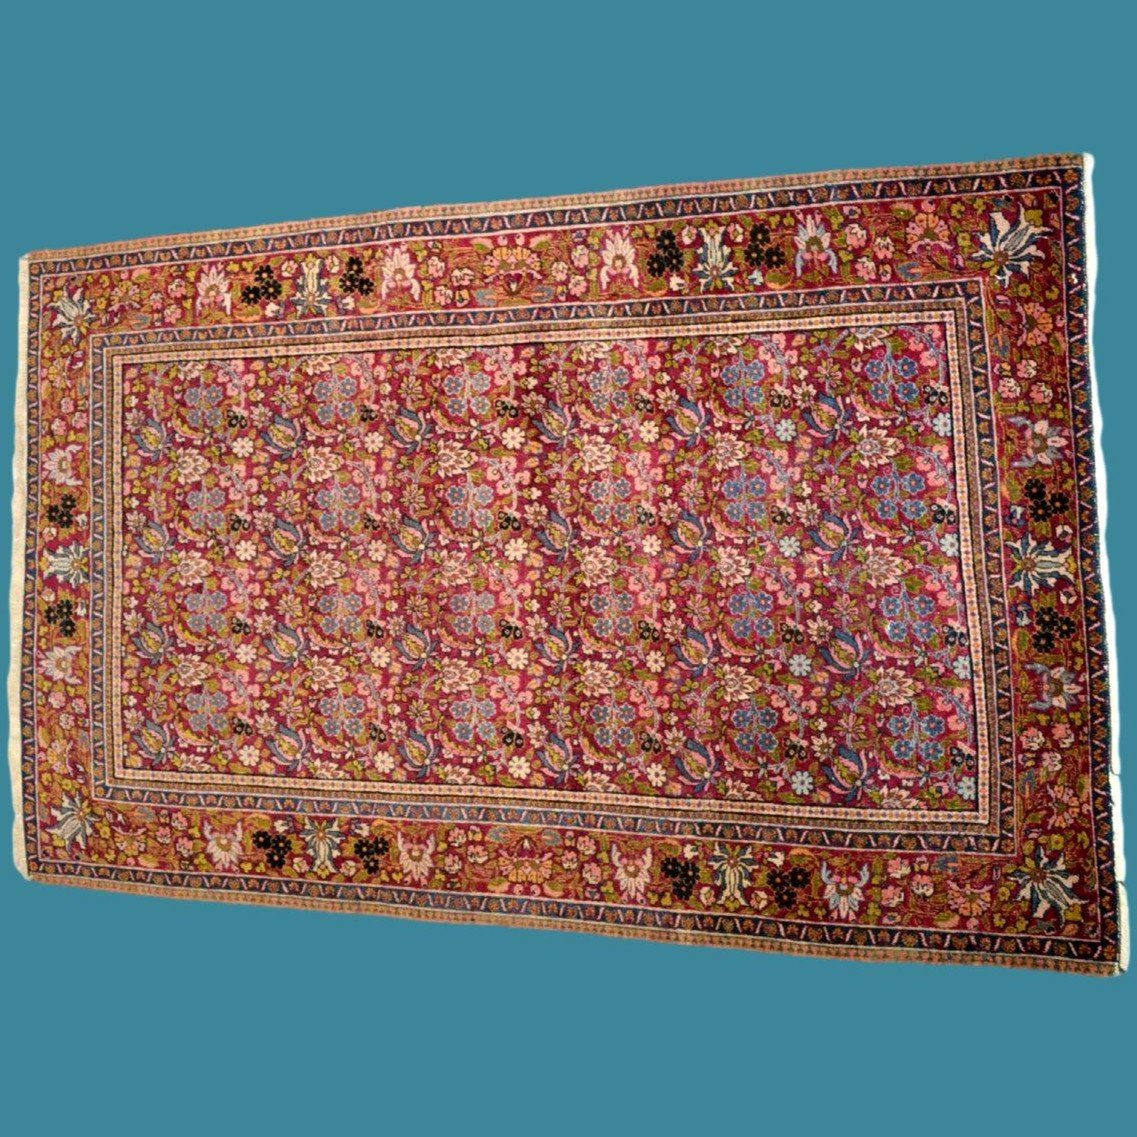 Old Floral Kirman, 139 X 216 Cm, Hand-knotted Wool In Persia, Iran, Late 19th And Early 20th Centuries-photo-4